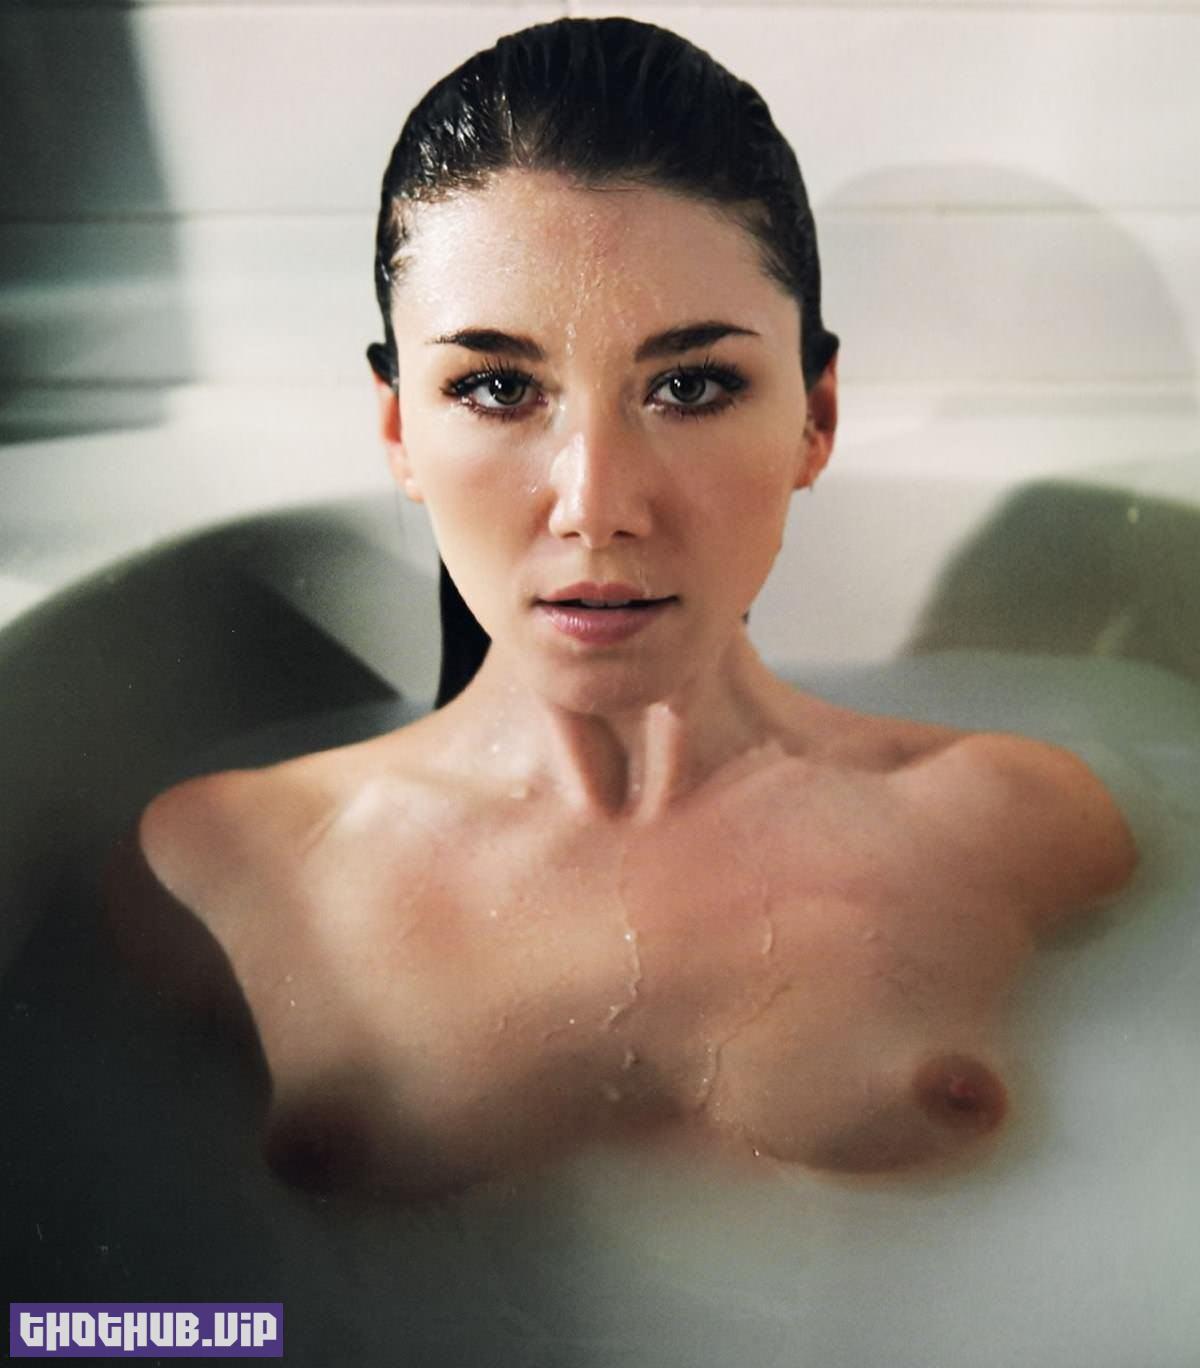 Jewel Staite Naked in Bath